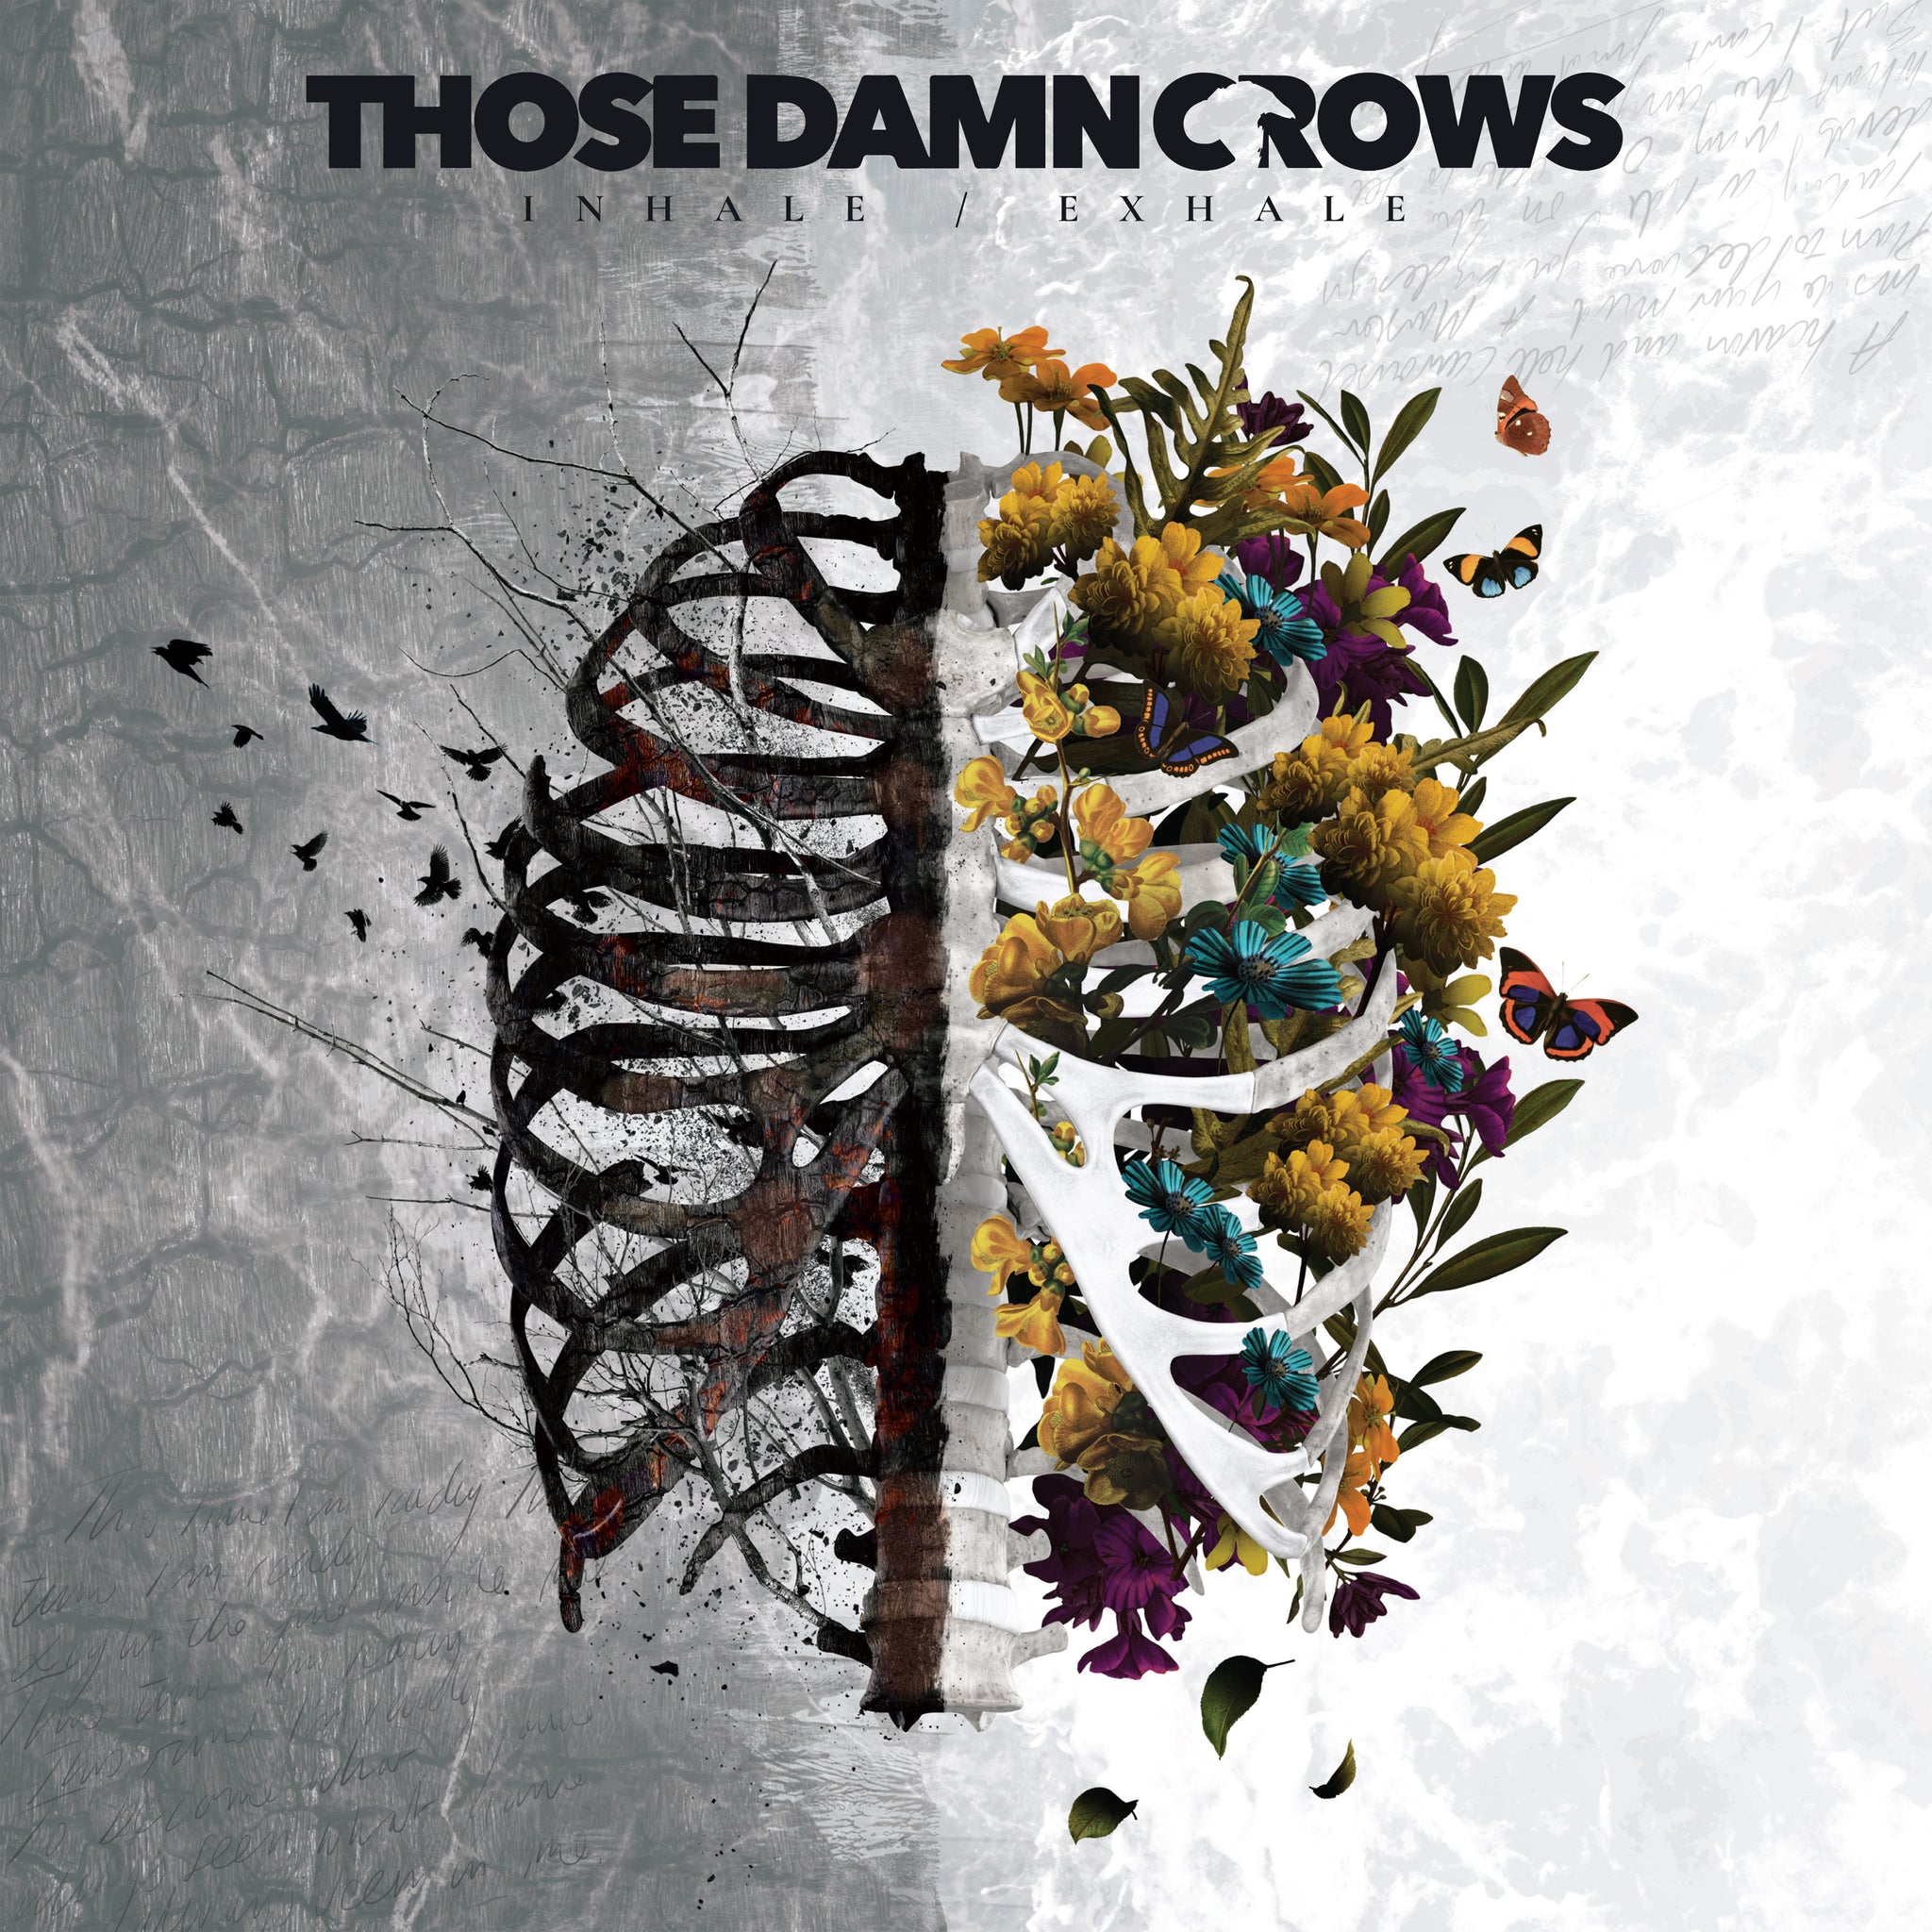 Those Damn Crows "Inhale/Exhale" Digital Download (MP3 and WAV)